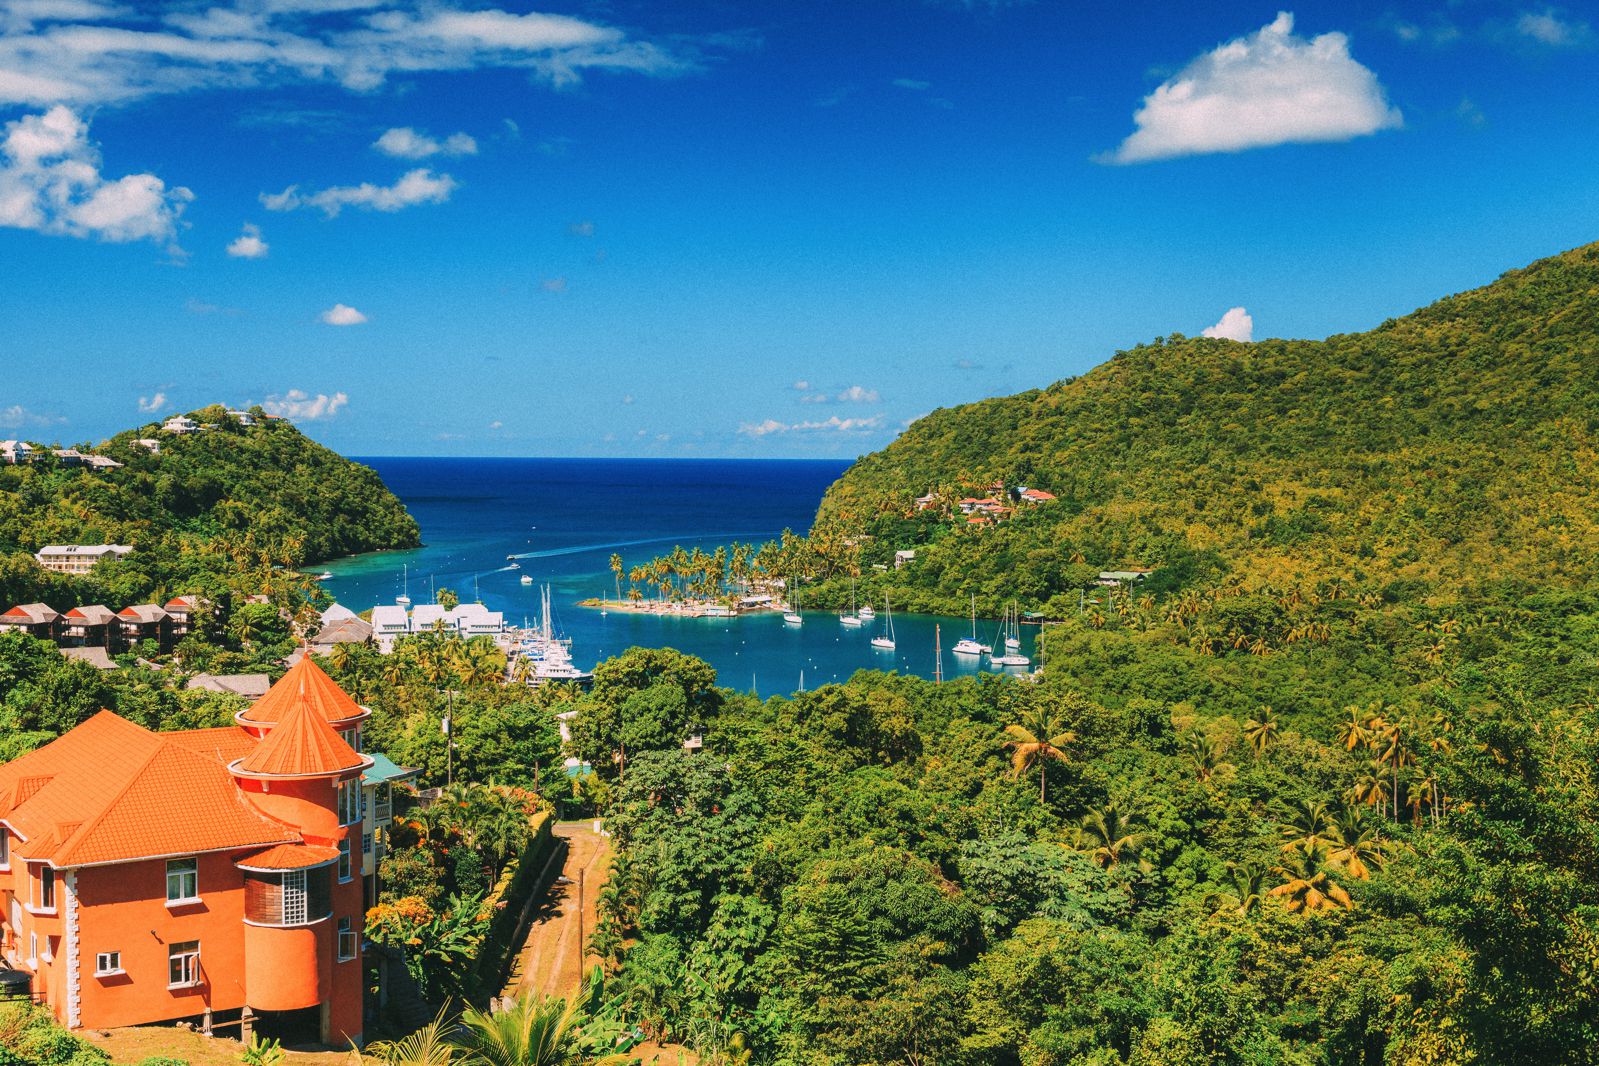 11 Fantastic Places To Visit In The Caribbean Island Of St Lucia (8)